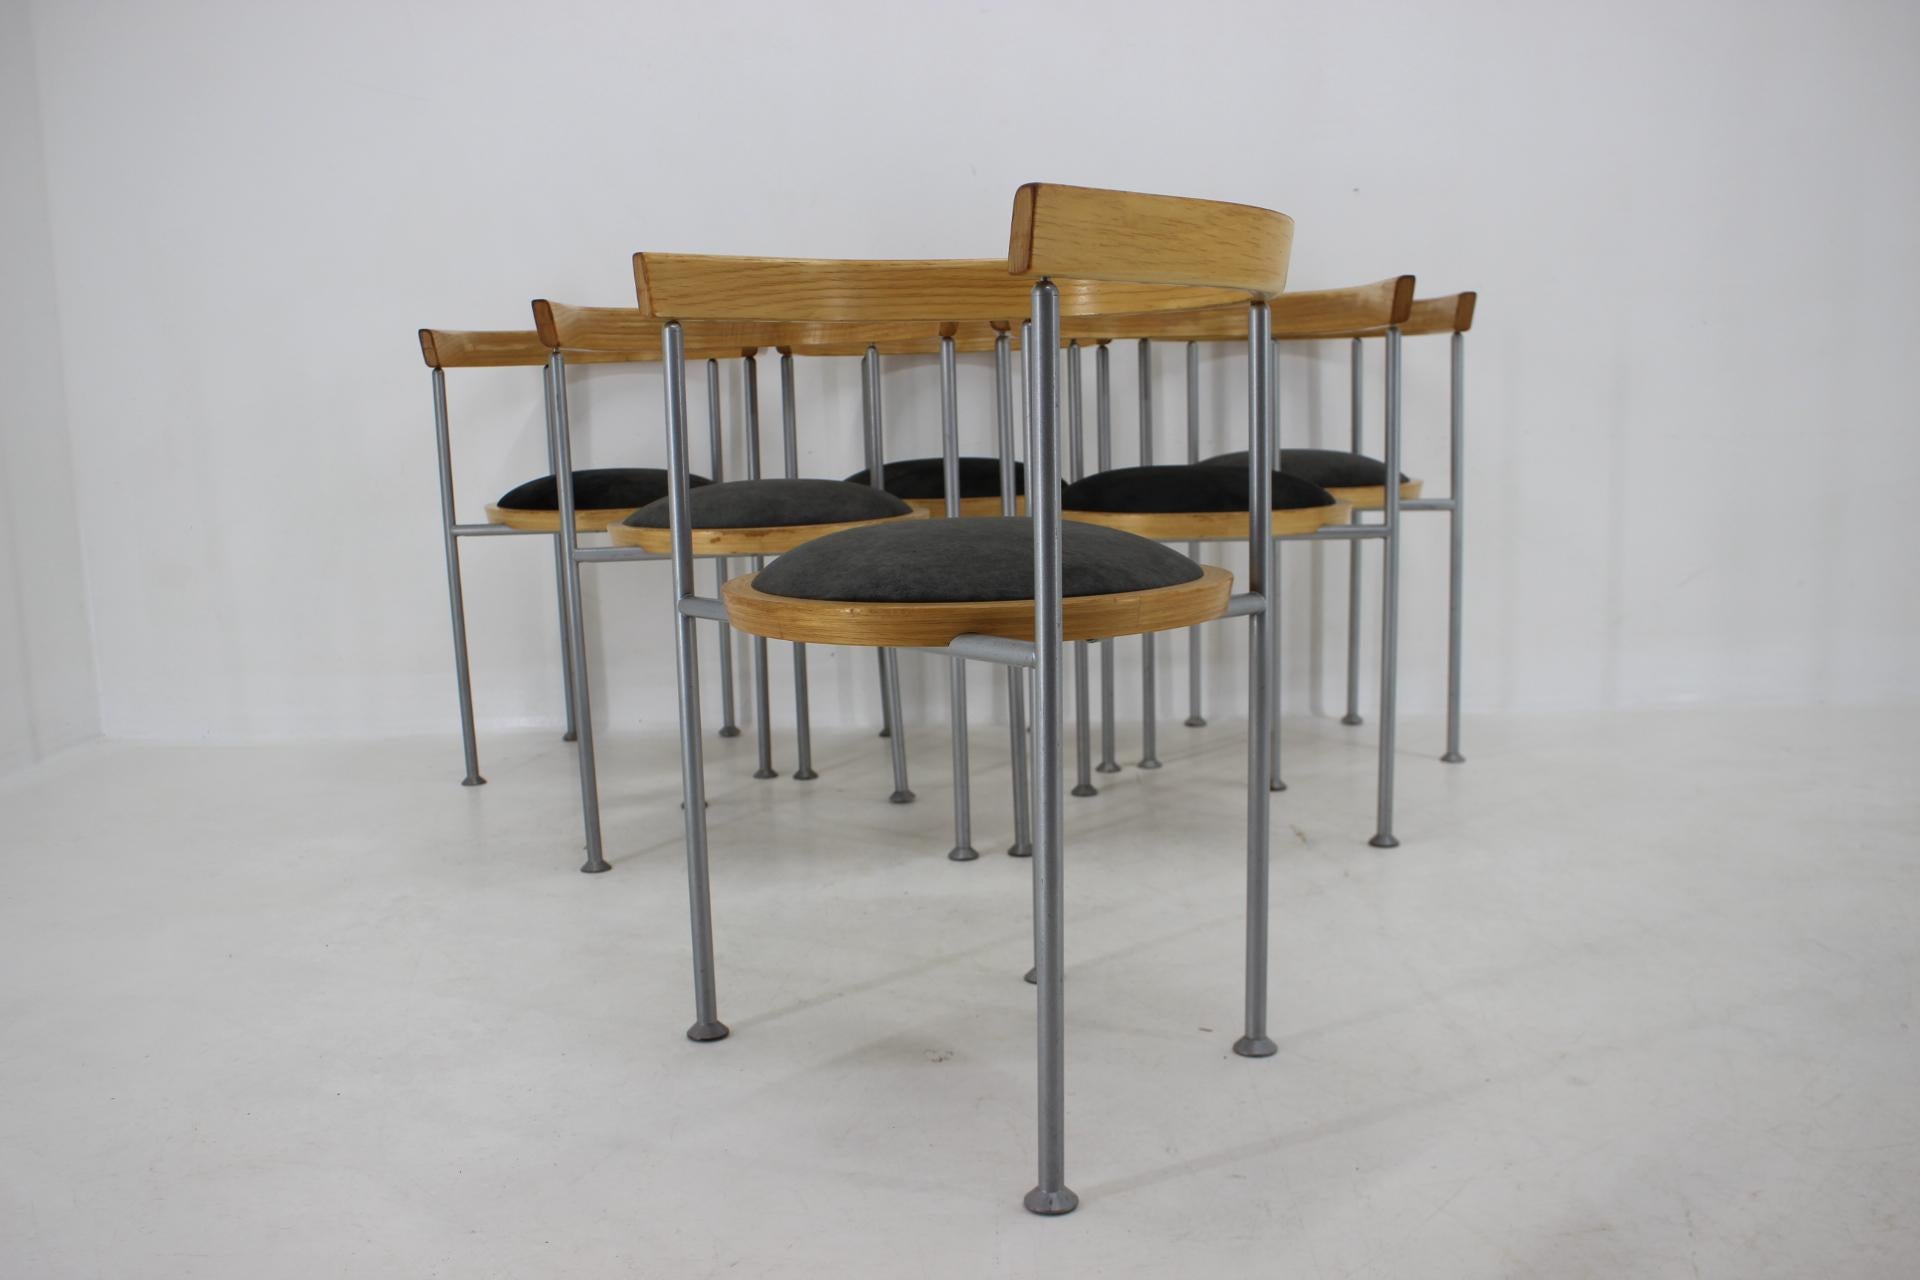 1990s Borge Lindau Set of 6 Dining Chairs for Bla Station, Sweden For Sale 3